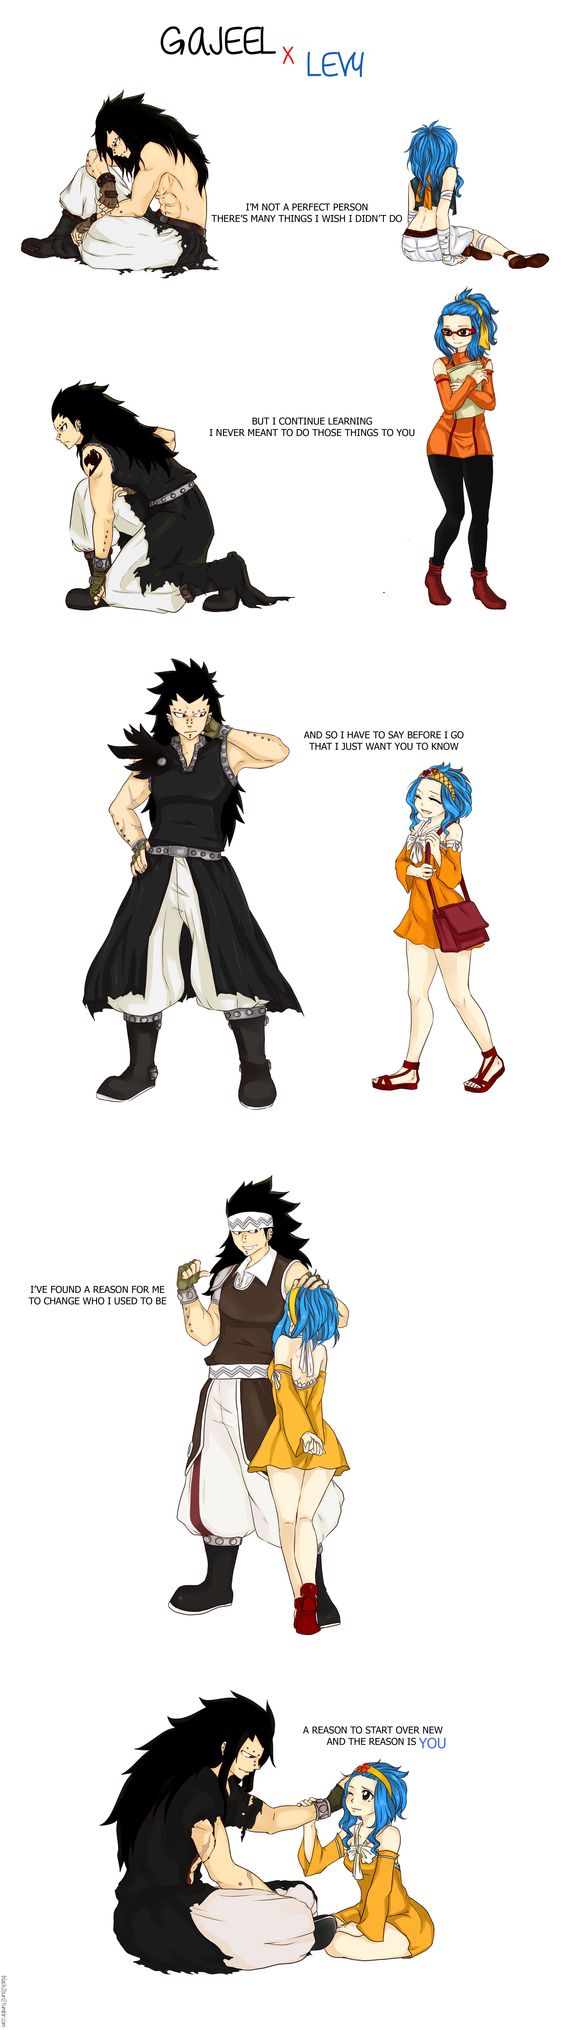 Gajeel x Levy -- Fairy Tail gale